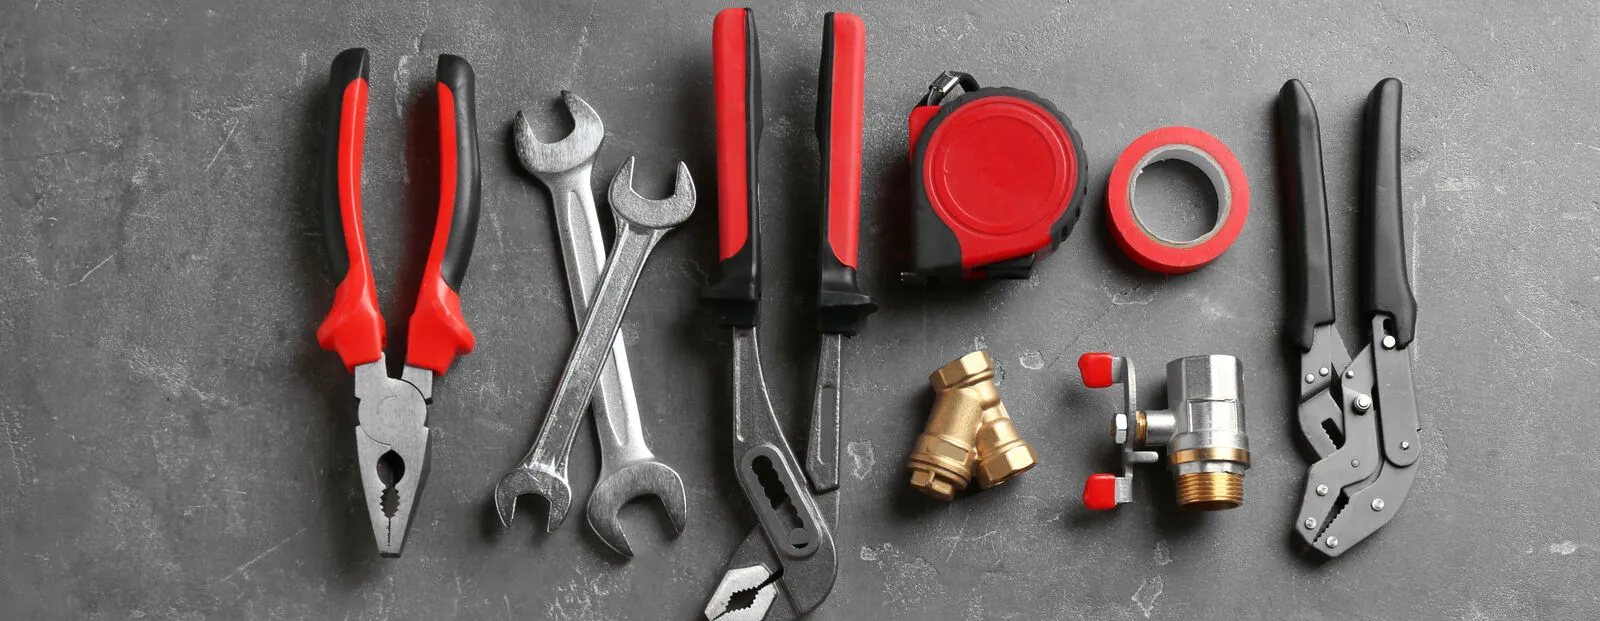 Flat lay composition with plumber's tools and space for text on gray background.jpg